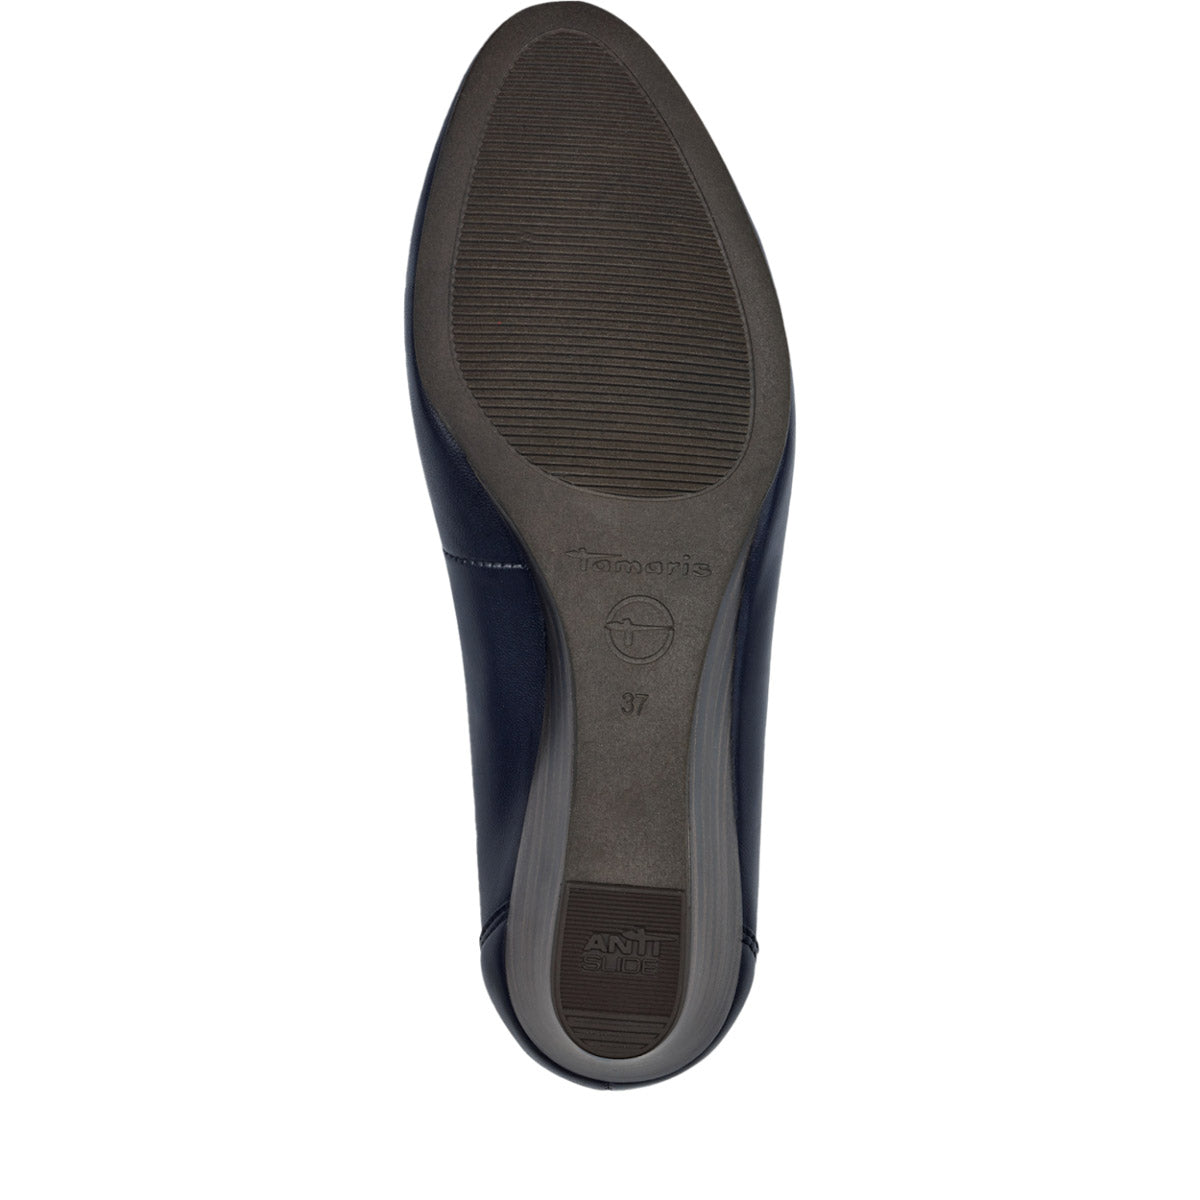 Sole view showing the durable synthetic material.